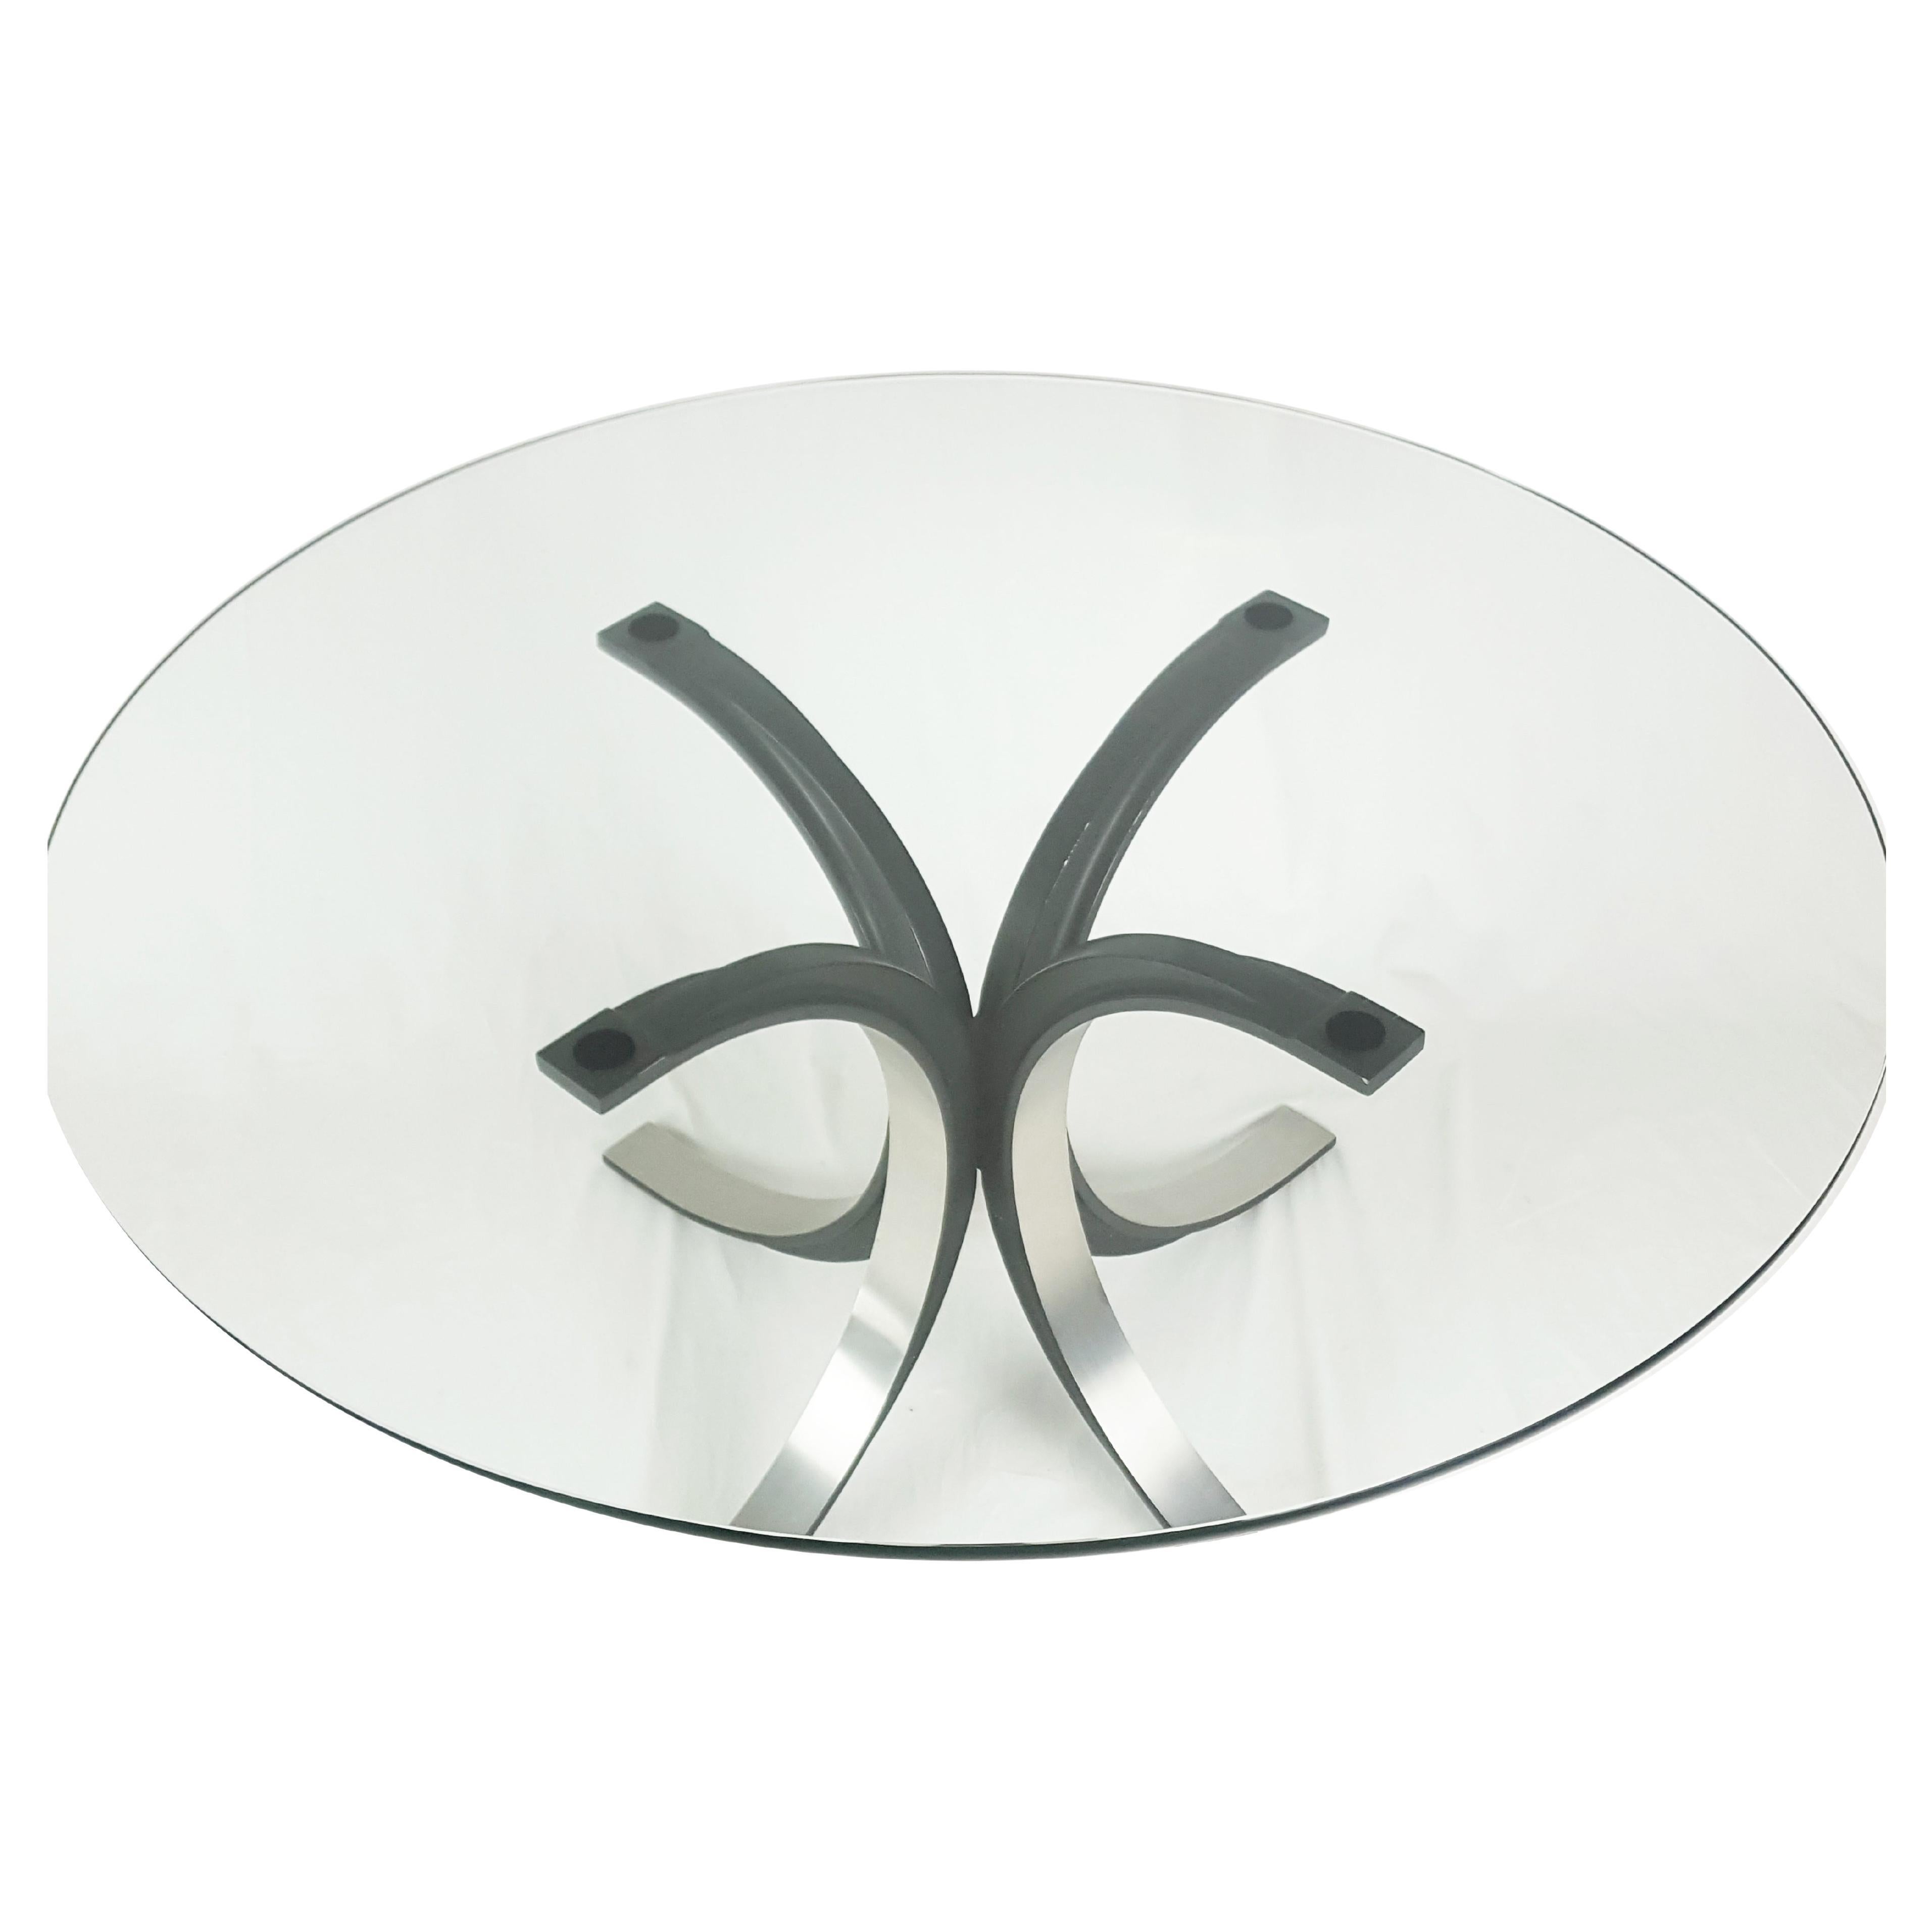 Tempered smoked glass table top for mod. T69 table designed by E. Gerli and O. Borsani and produced by Tecno.
The glass has been ground to allow perfect positioning with the legs in cast aluminum.